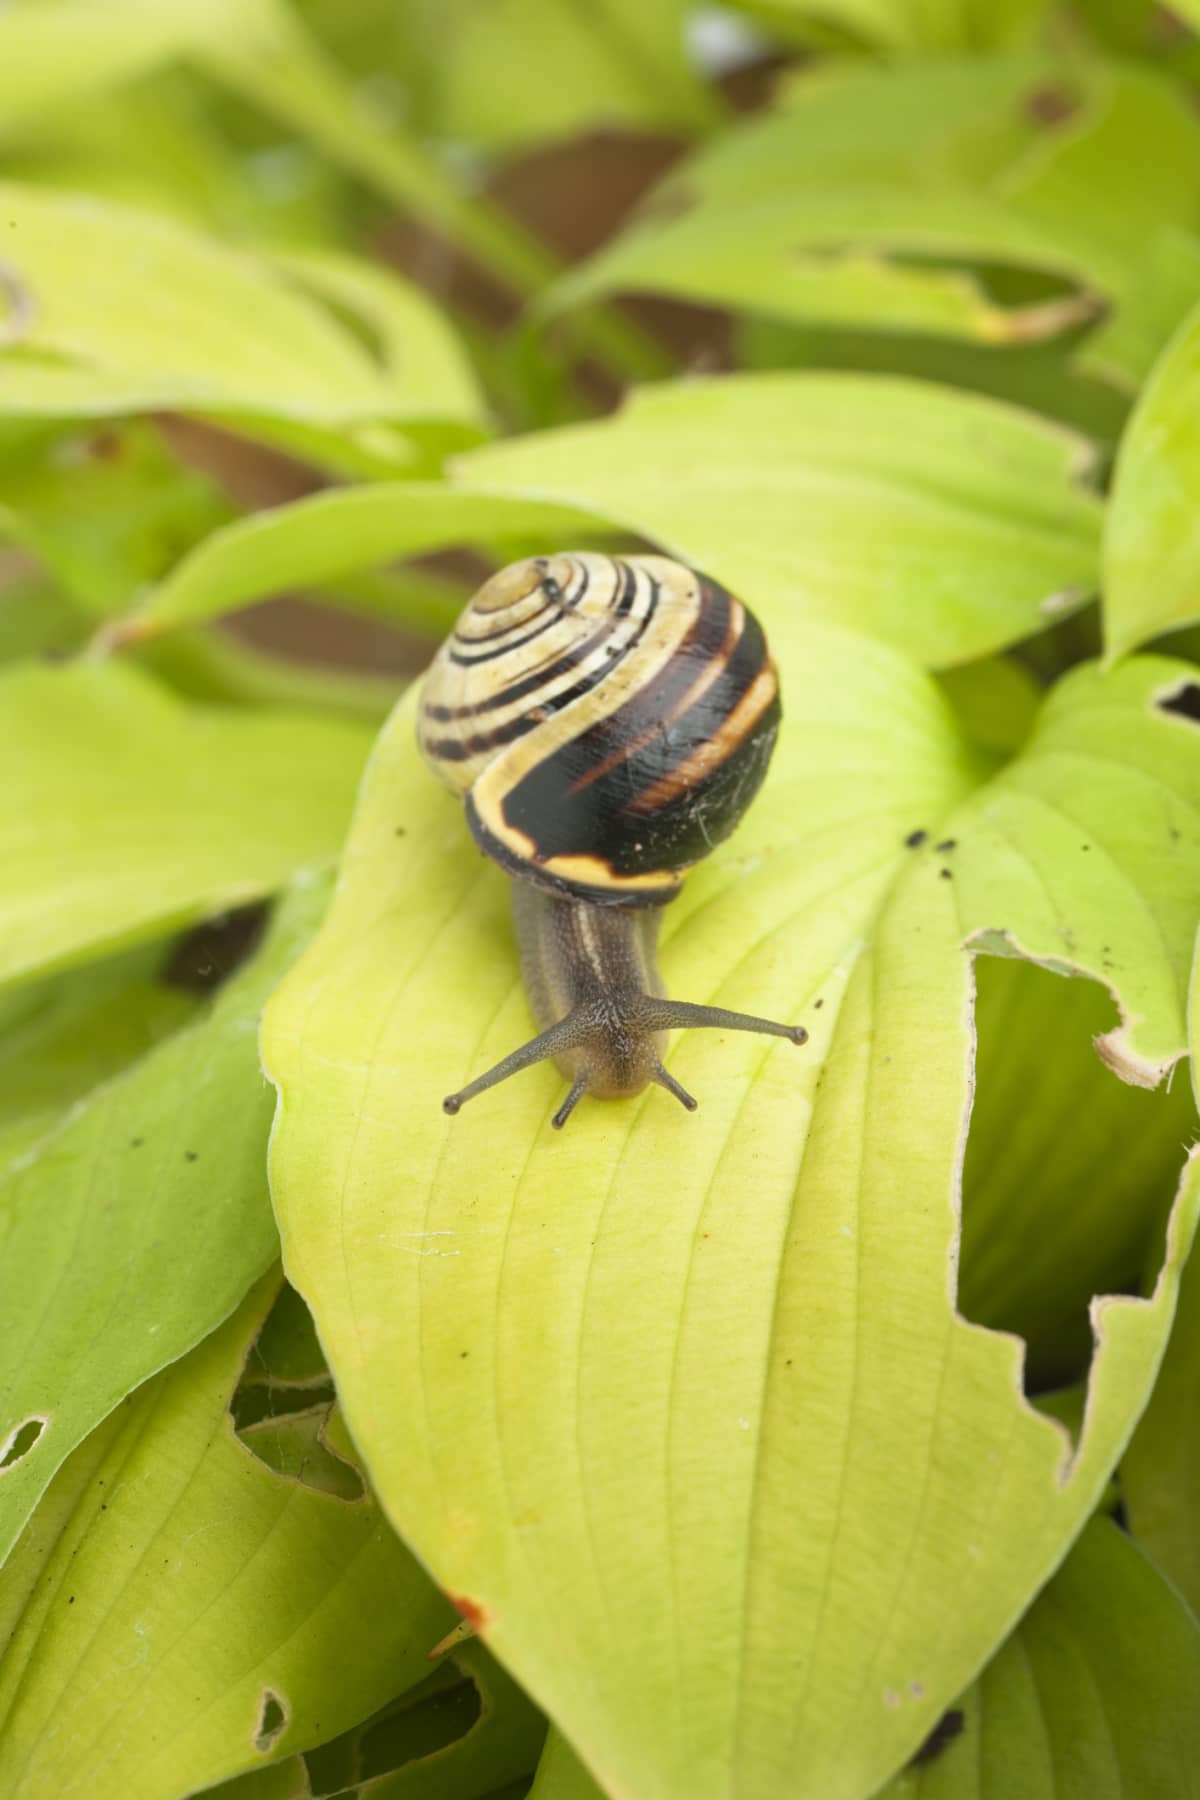 A snail on hosta leaves which have been previously damaged by snail/slug attack